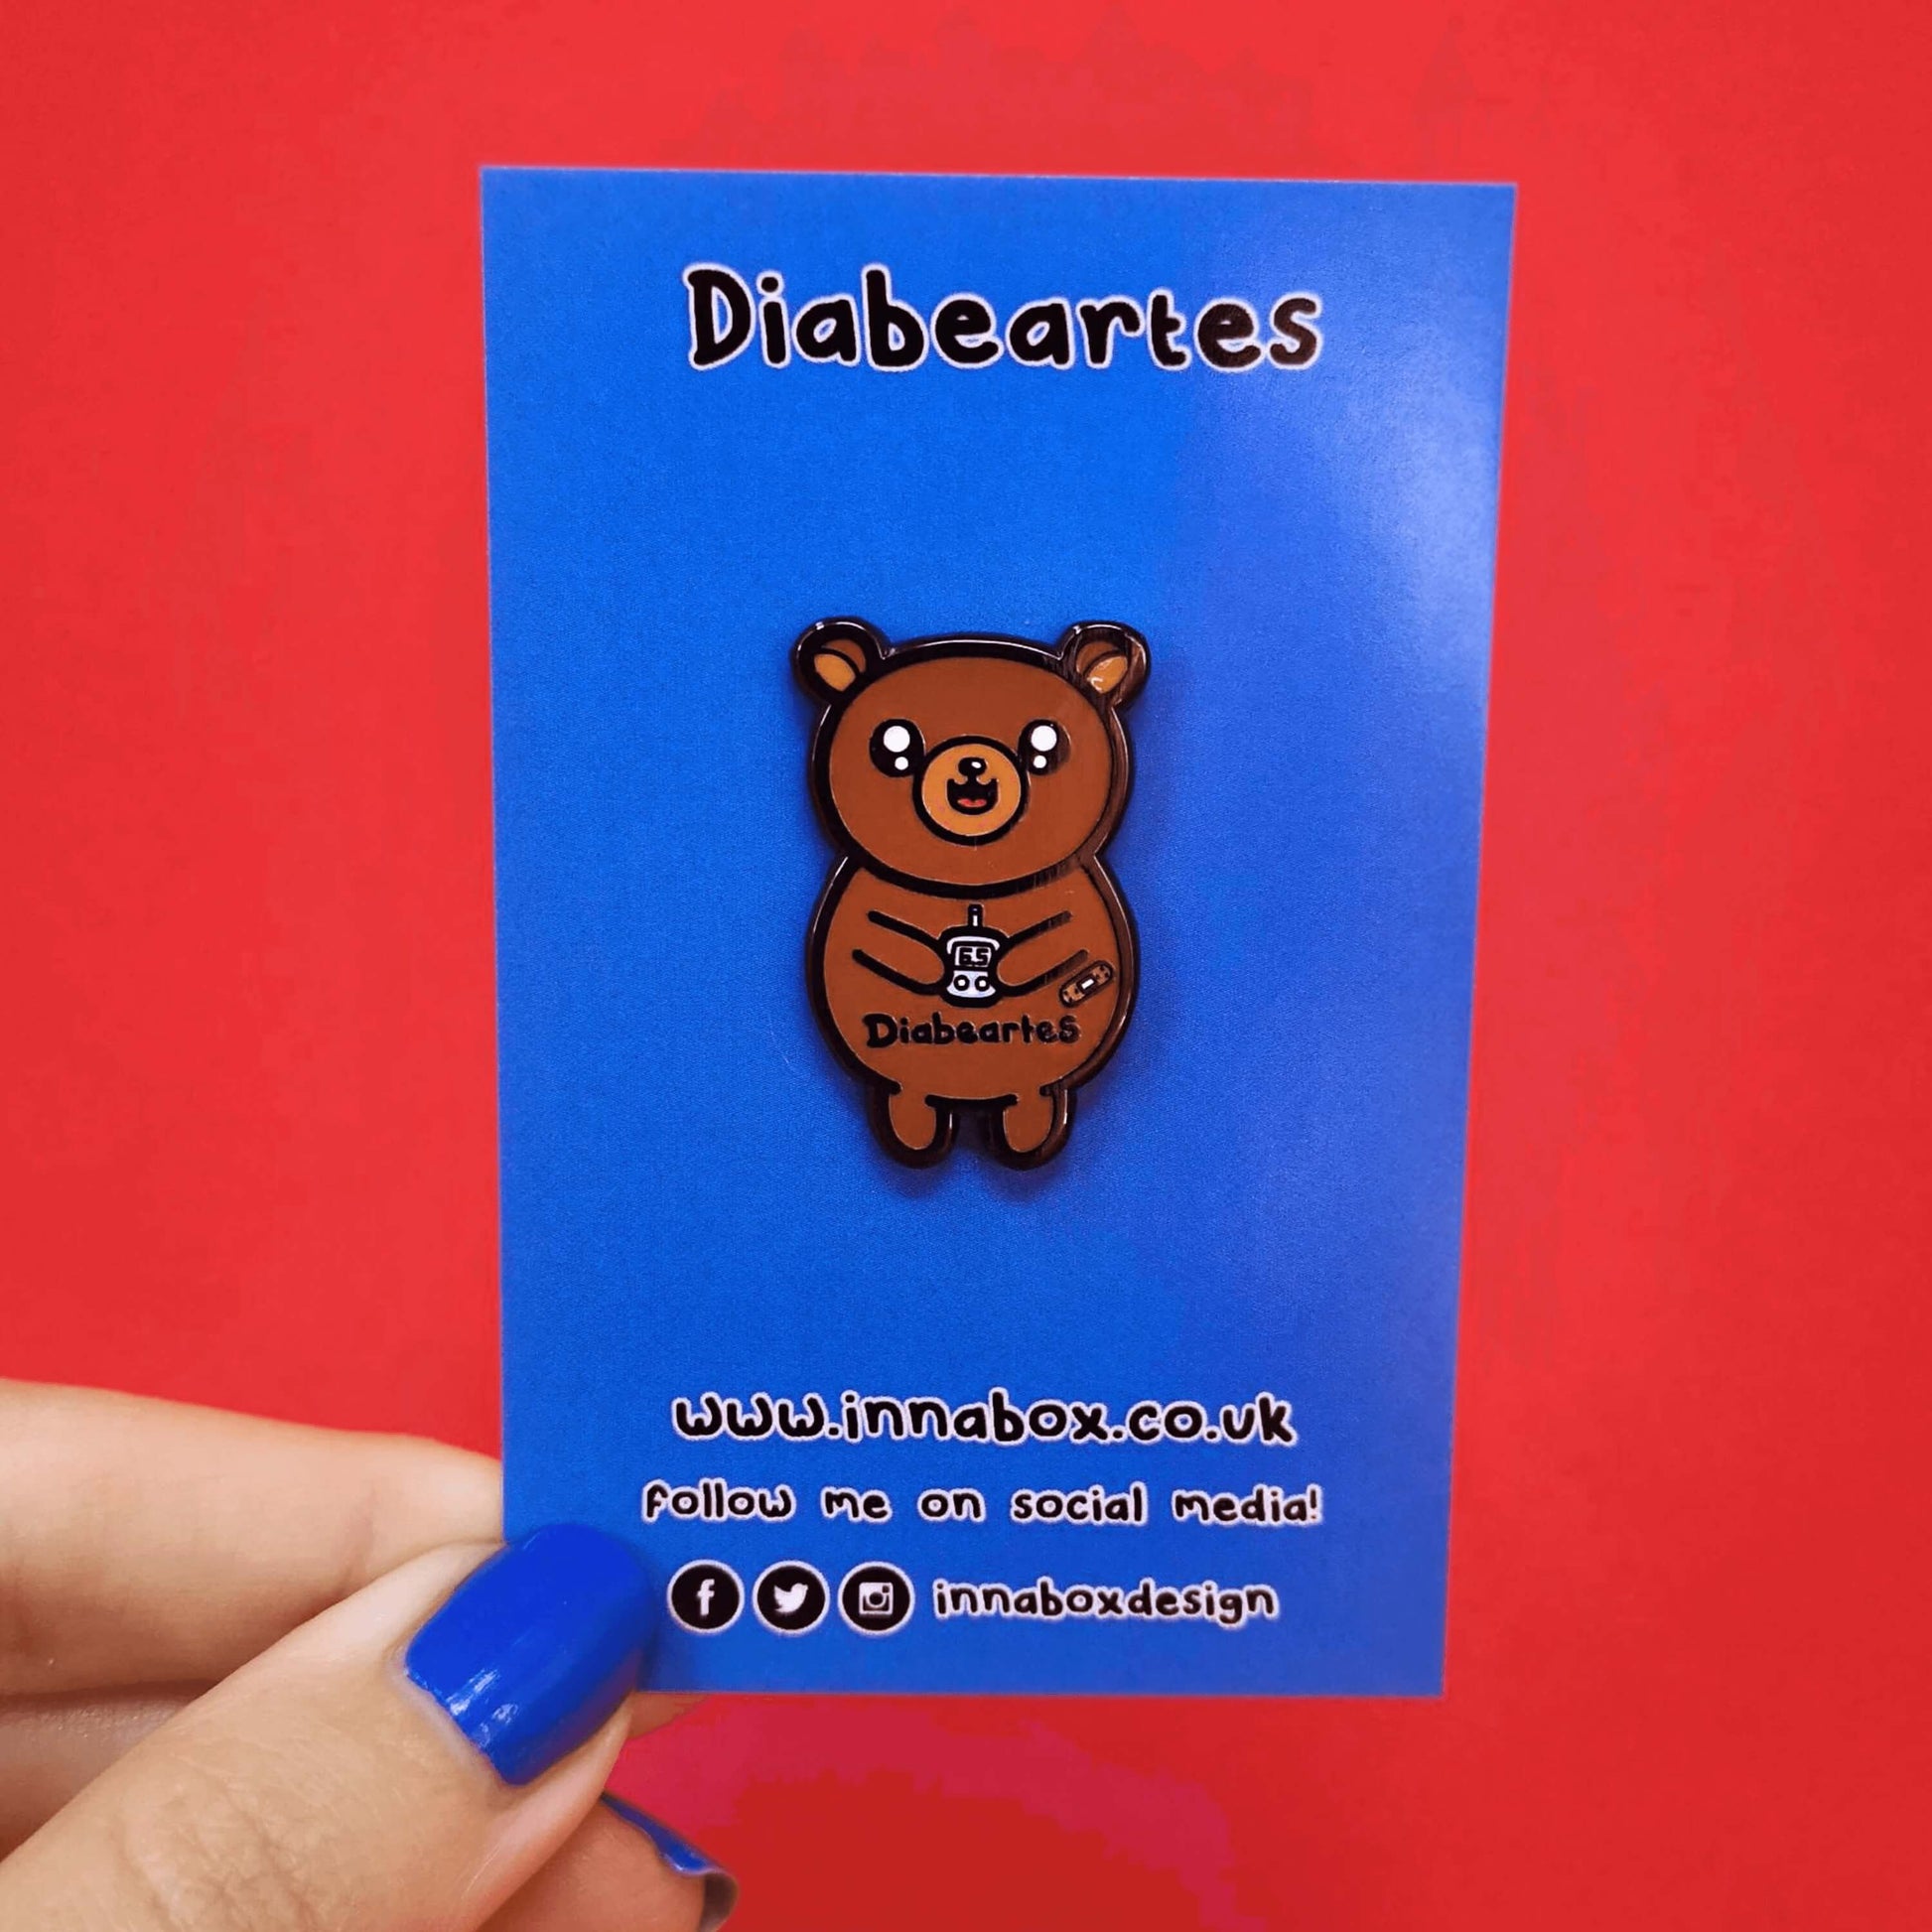 The Diabeartes Enamel Pin - Diabetes on blue backing card with black text above reading 'diabeartes' and below text of the innabox website and social handles being held over a red background. The brown bear shaped pin is smiling holding a blood glucose reader with a plaster on its arm, across its tummy reads 'diabeartes' in black. The design is raising awareness for those with type 1 diabetes and type 2 diabetes.